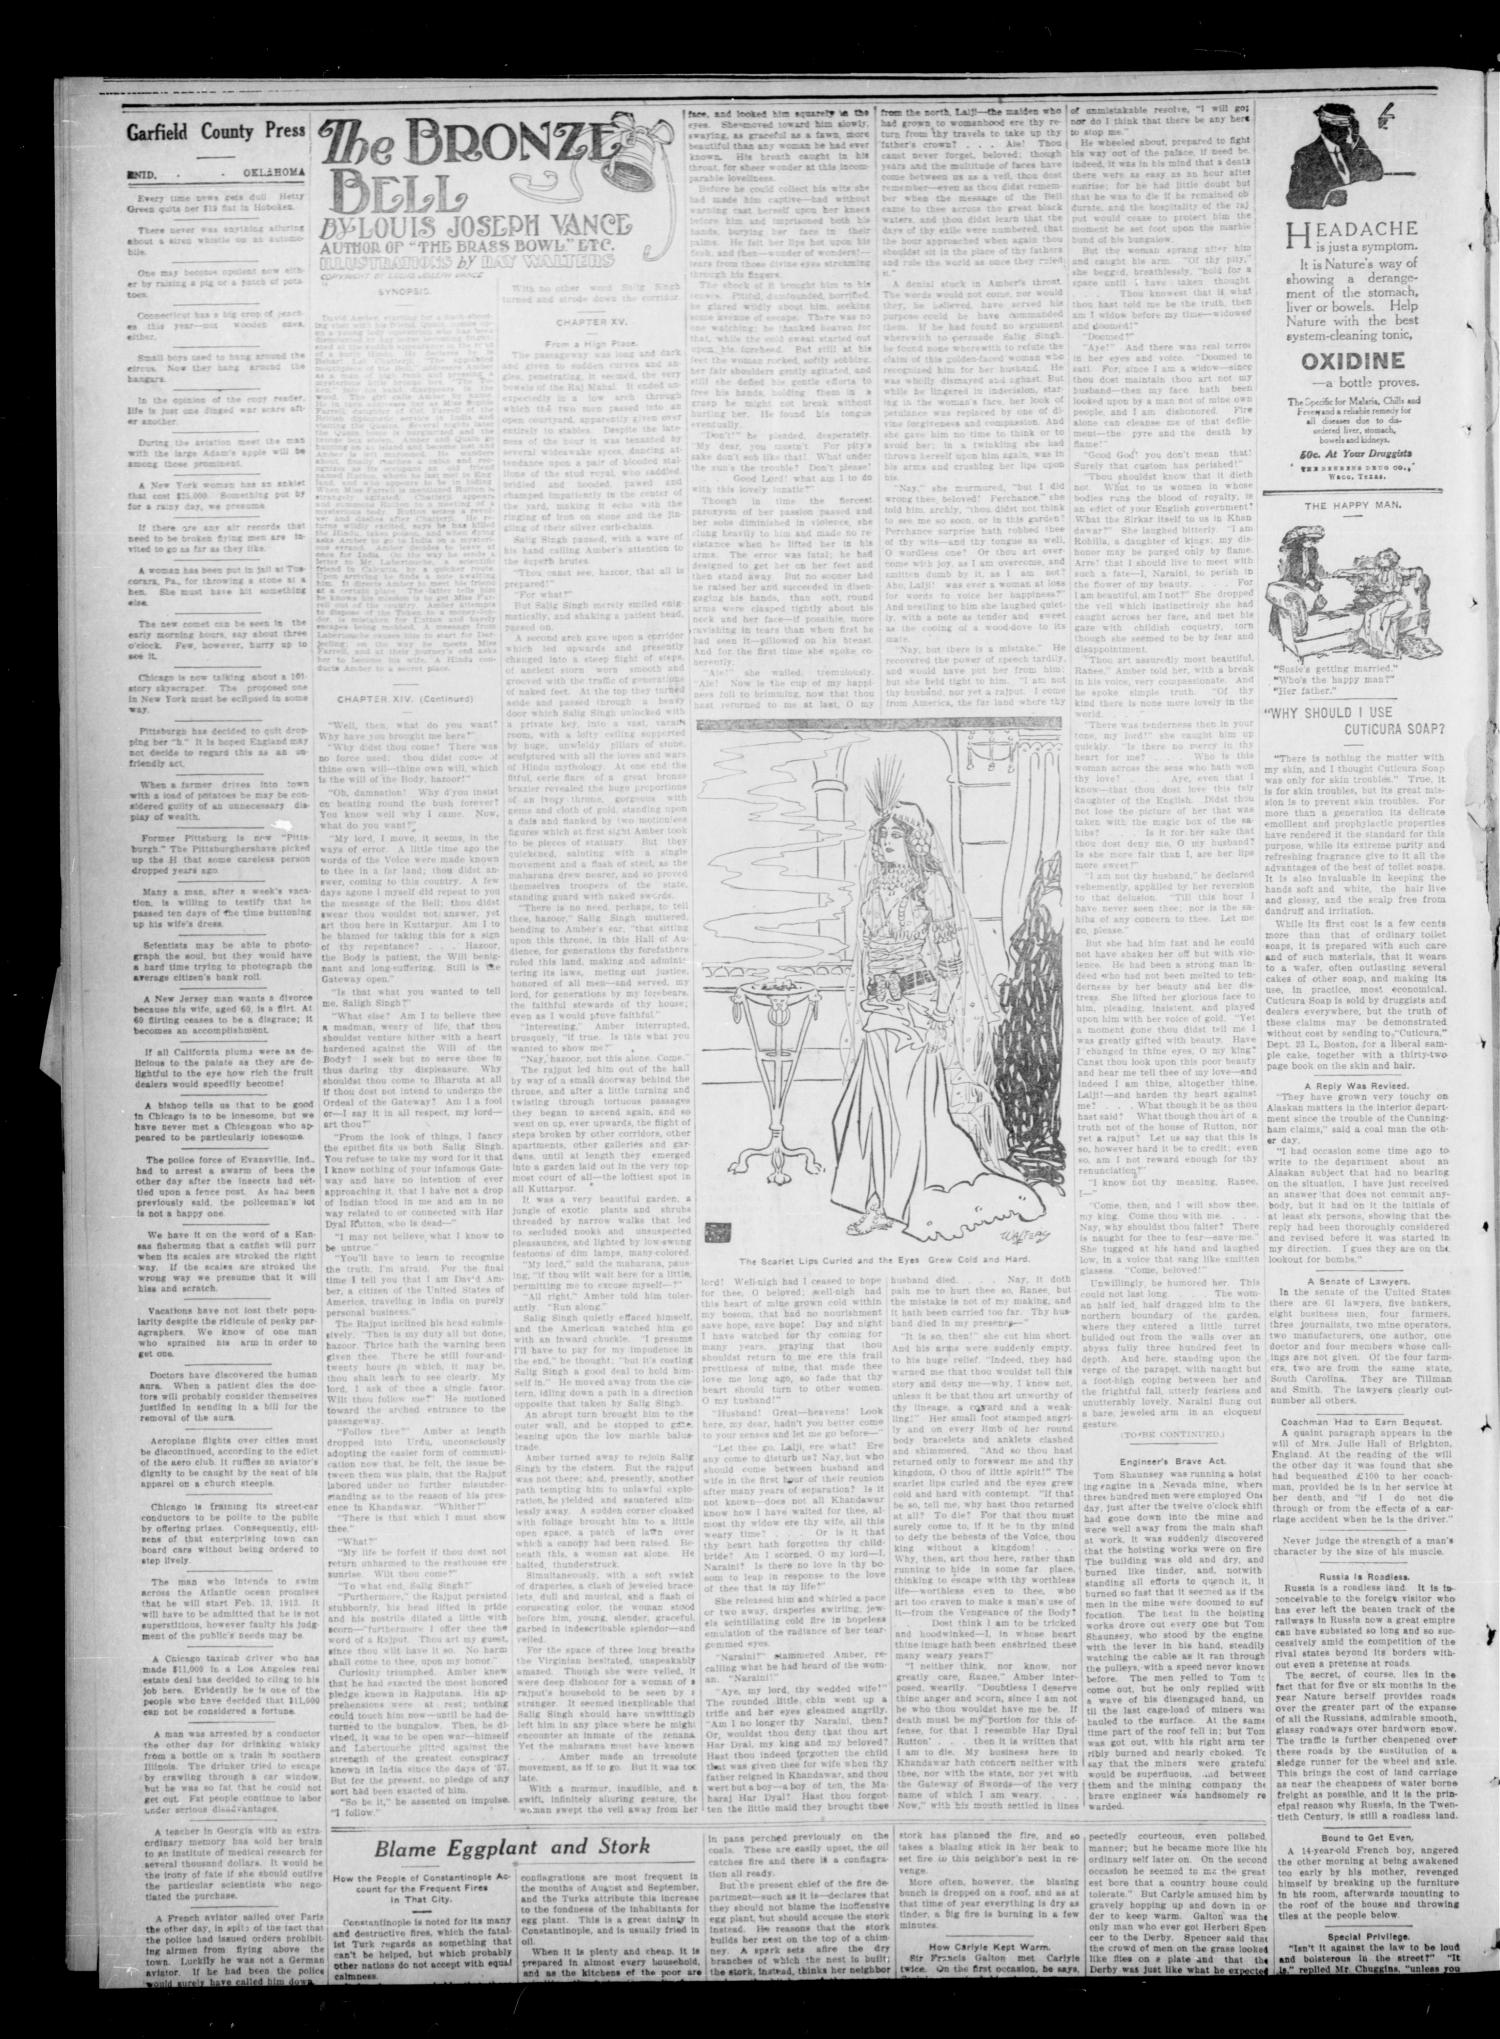 Garfield County Press. And Enid Wave-Democrat (Enid, Okla.), Vol. 17, No. 43, Ed. 1 Thursday, September 28, 1911
                                                
                                                    [Sequence #]: 2 of 8
                                                